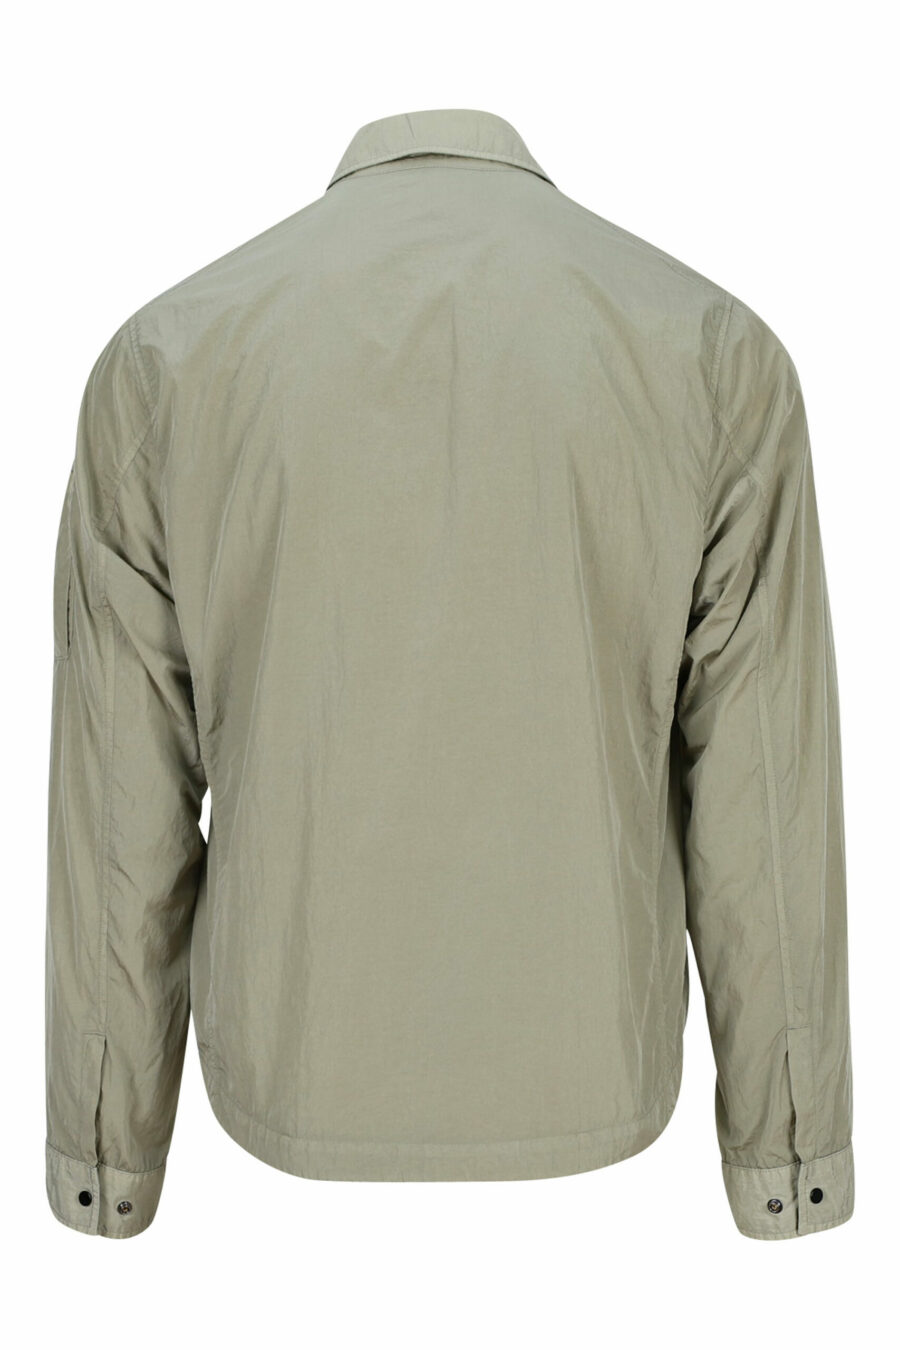 Chaqueta beige impermeable con logo lente lateral - 7620943555387 2 scaled